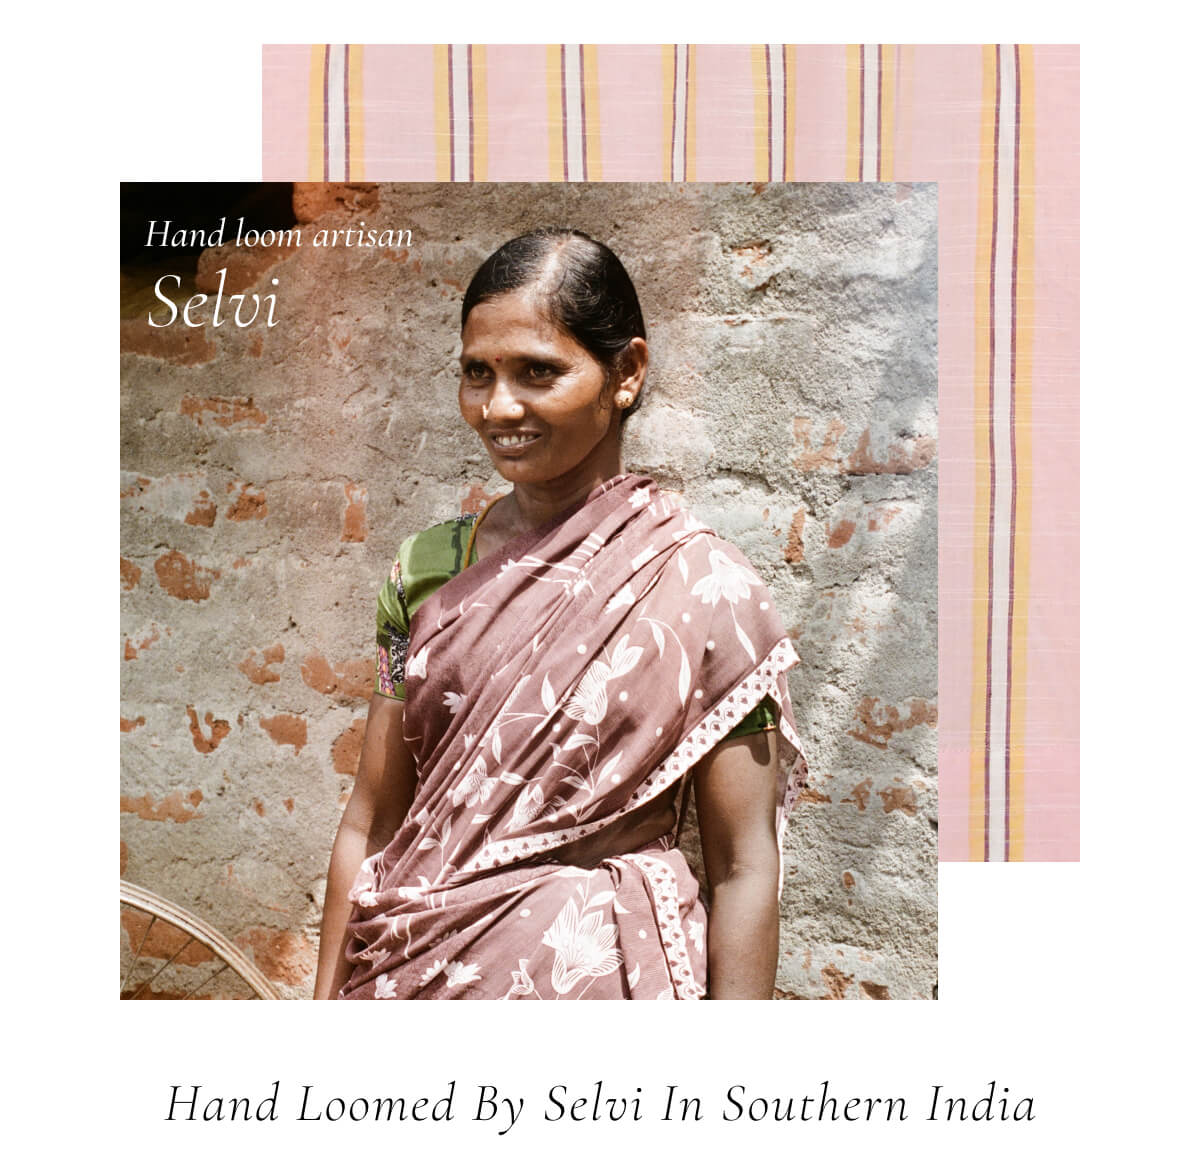 Hand Loomed By Selvi in Southern India